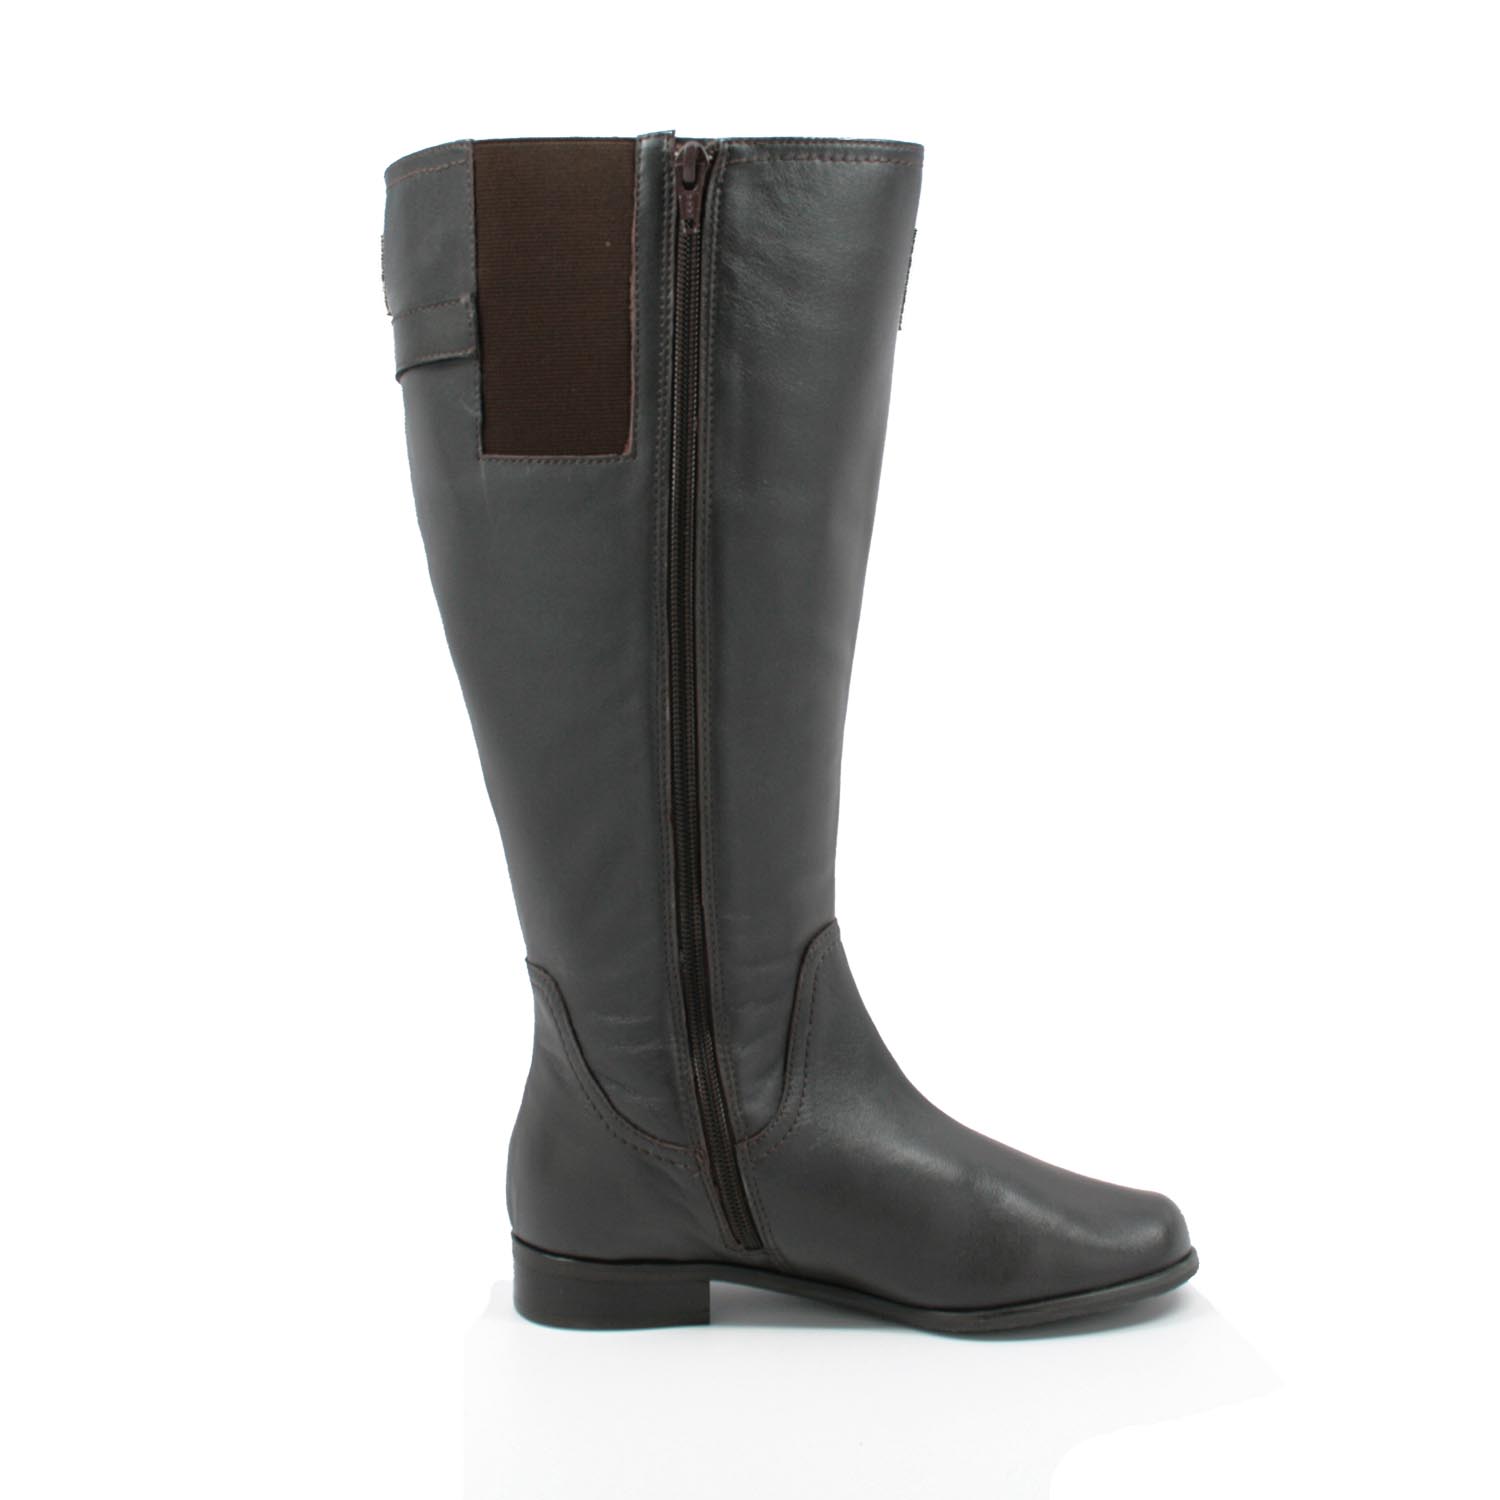 Rose Petals Trudy-2 Extra Wide Calf Brown Leather [R-20304-2] - $173.99 ...